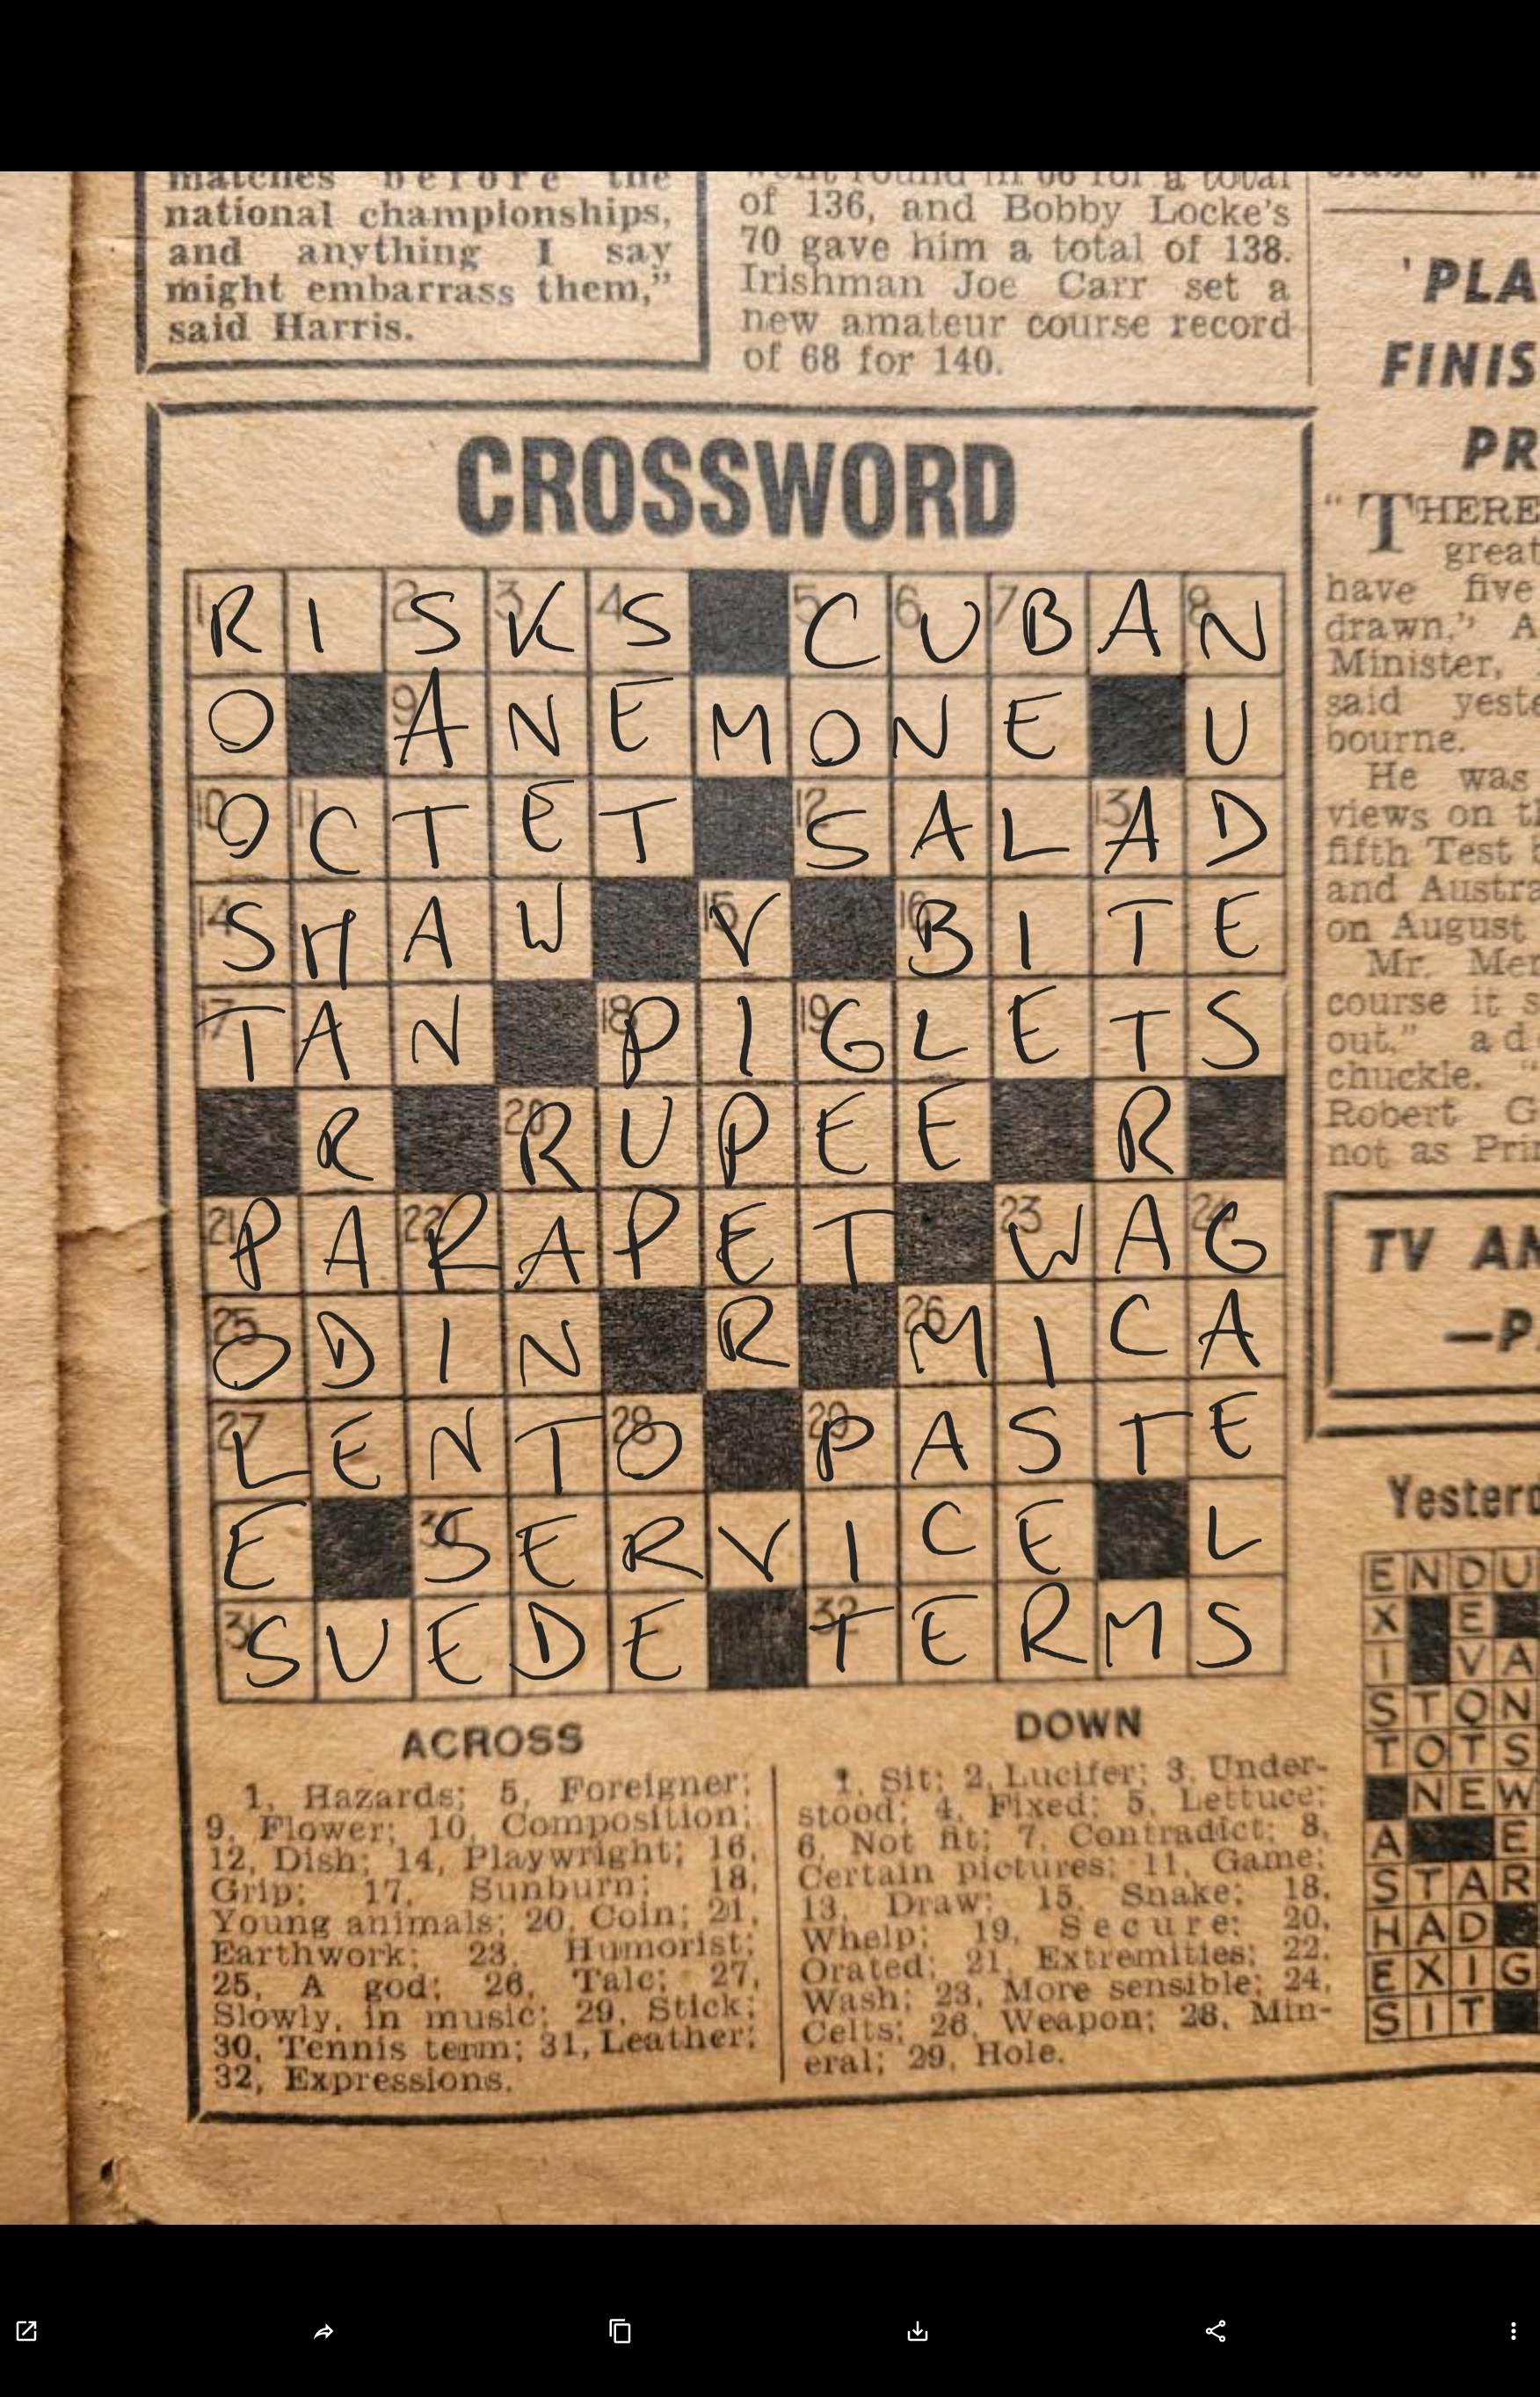 Any crossword fans? Here #39 s the Daily Mirror crossword from July 31